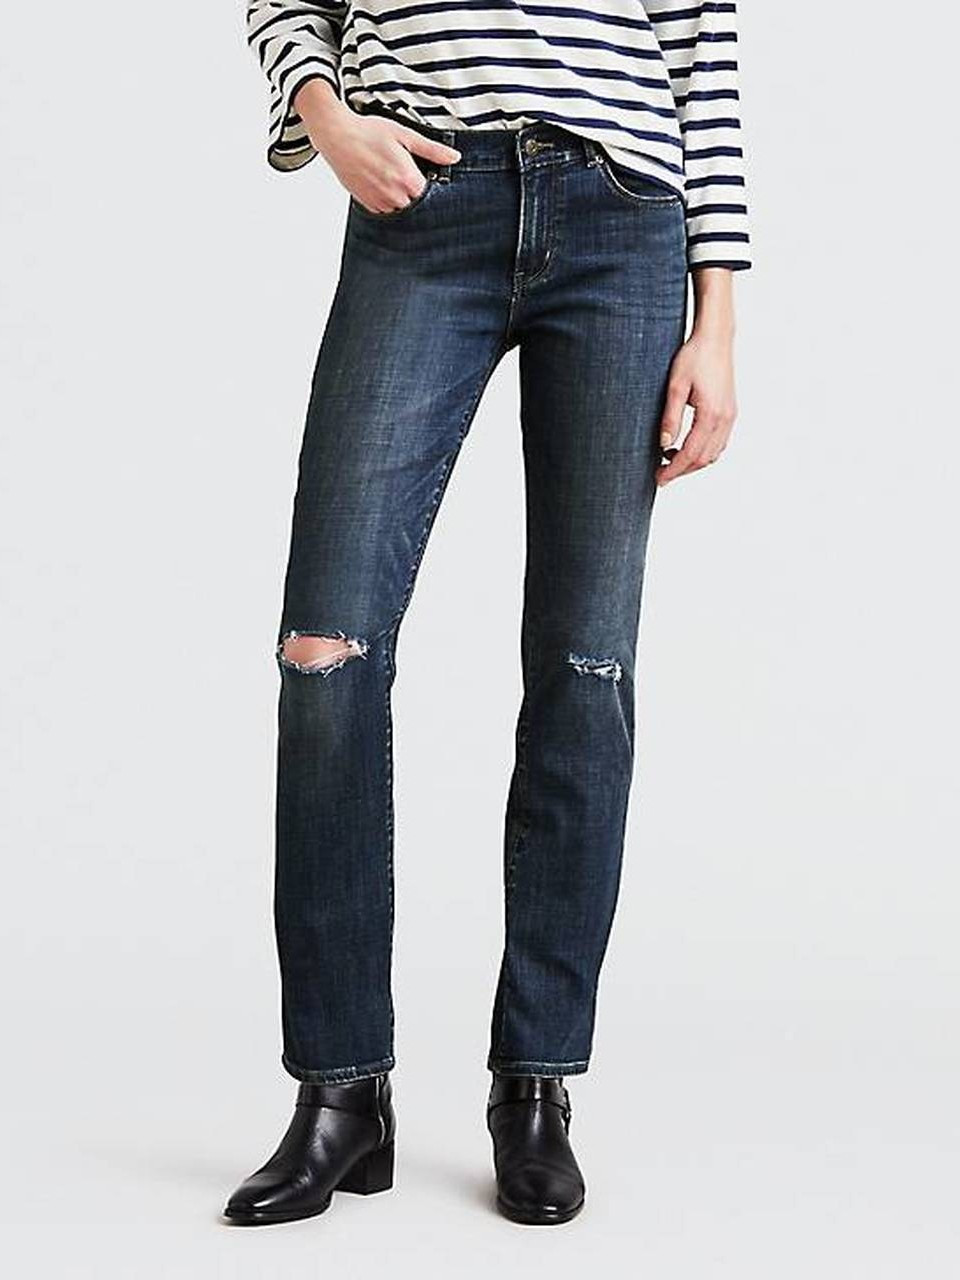 Levi's® Womens Classic Straight Jeans